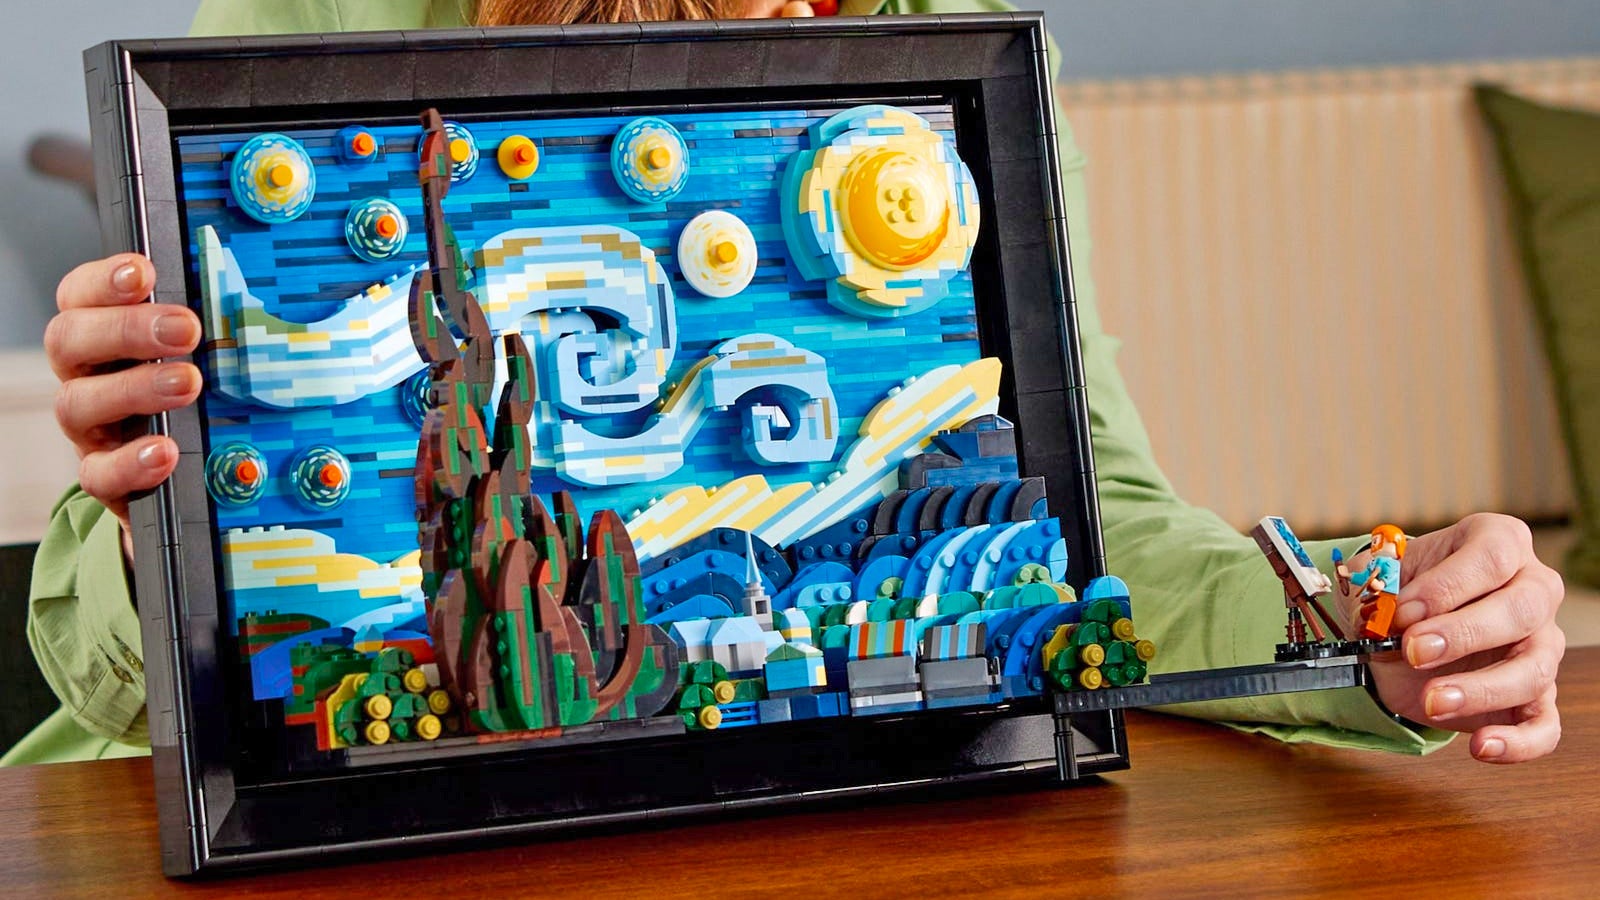 LEGO’s ‘The Starry Night’ Brings Van Gogh’s Most Famous Painting Into the Third Dimension